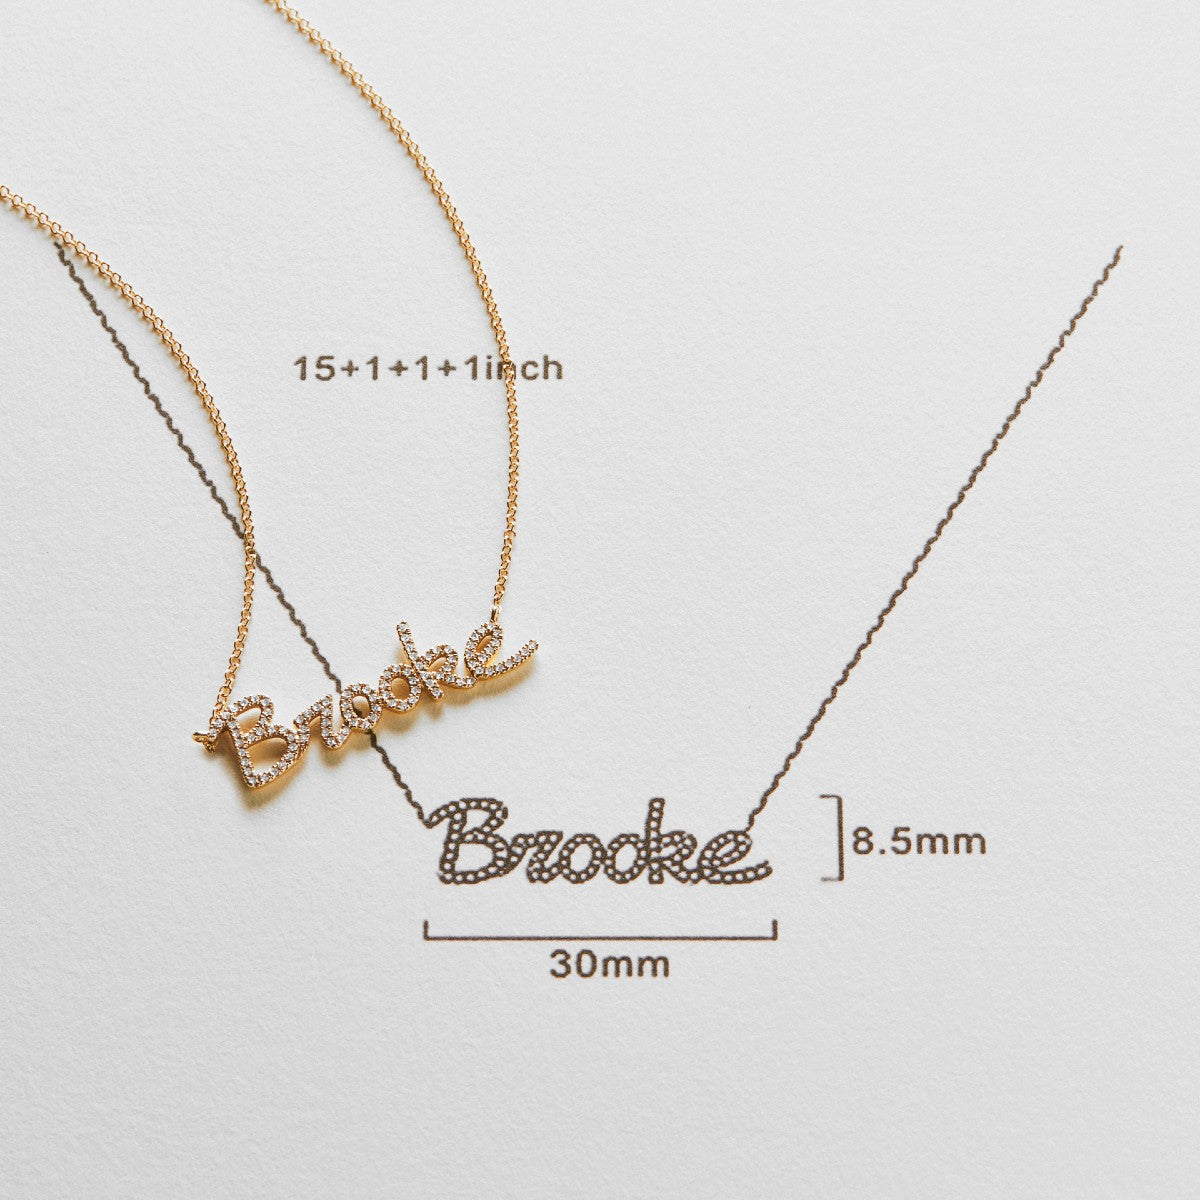 14KT Yellow Gold Diamond Personalized Name Necklace